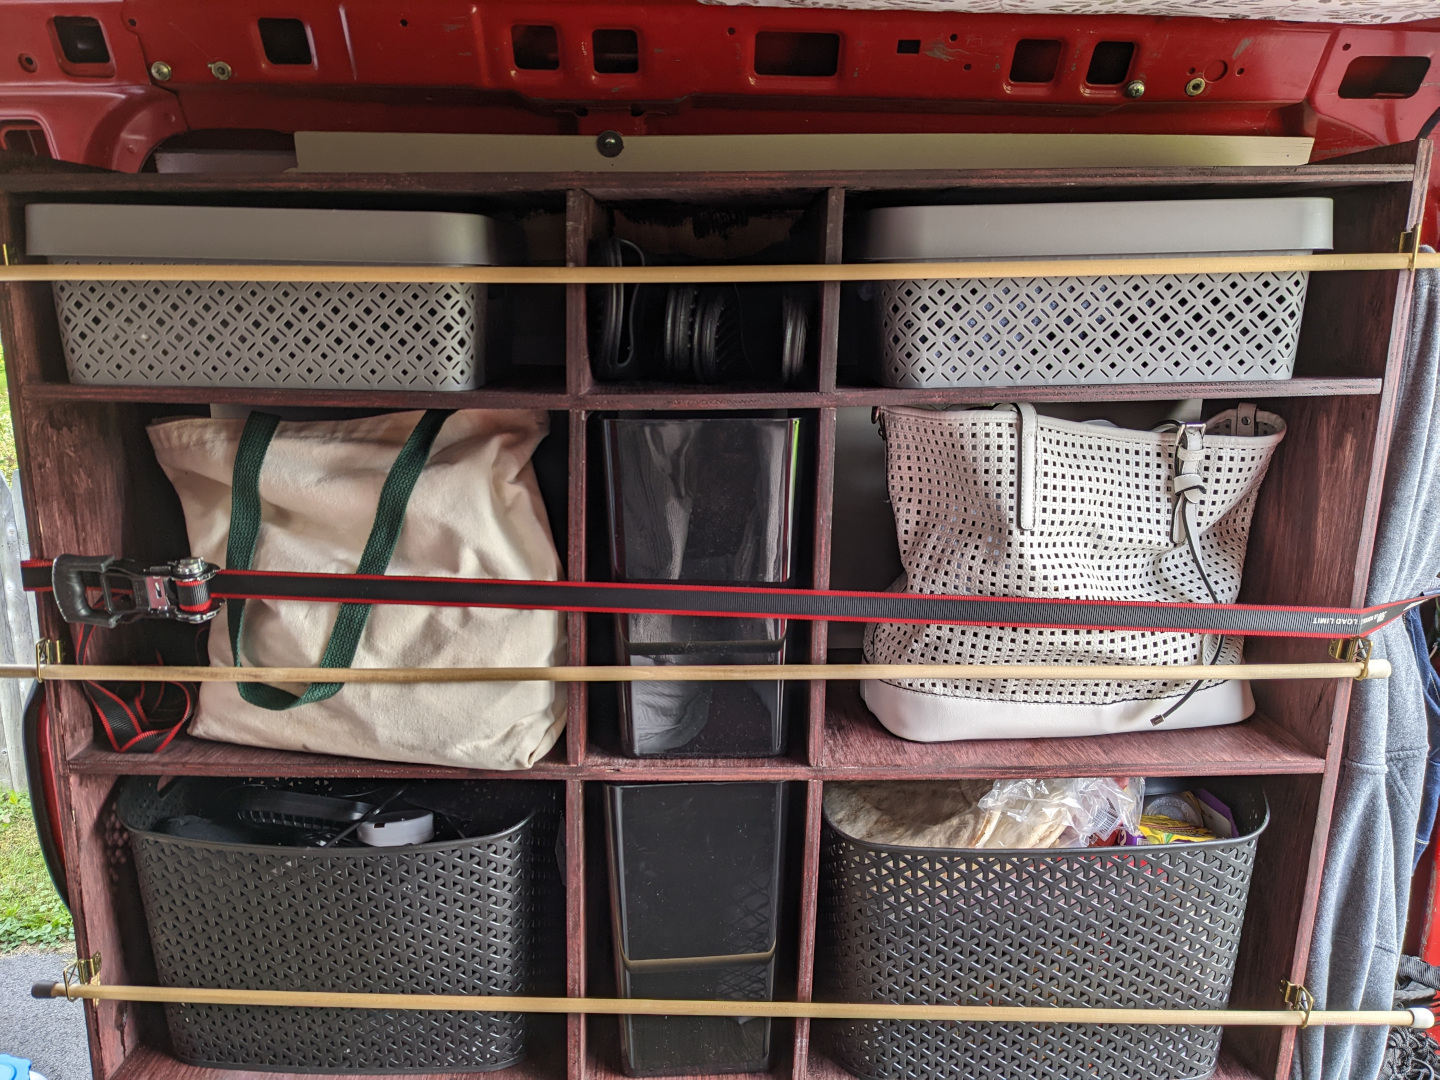 View of cabinet with cargo net off